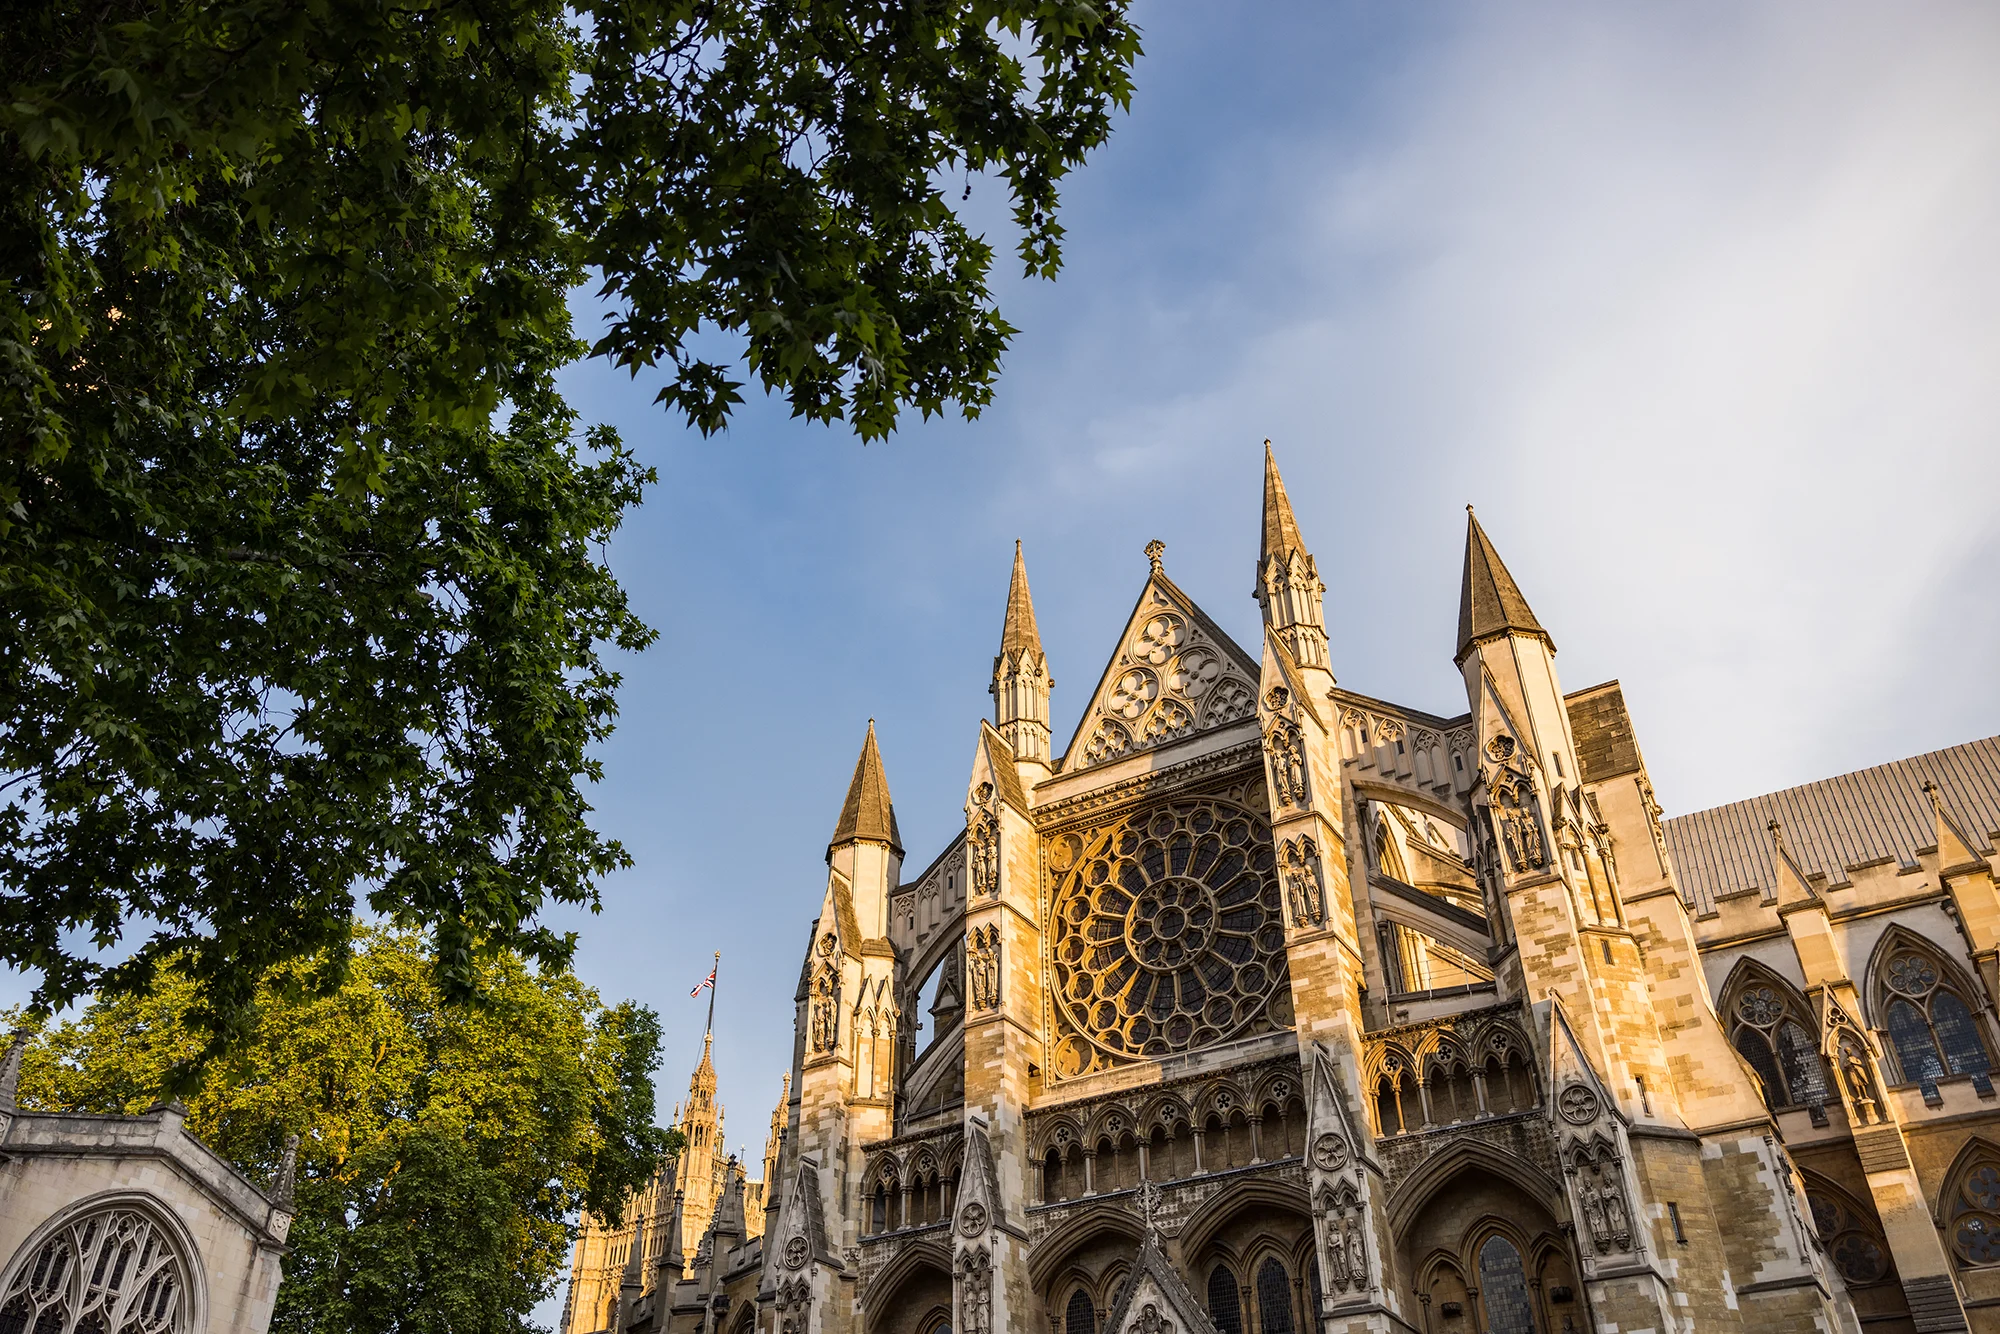 Looking up at the front of Westminster Abbey, with a blue sky above and a tree on the left